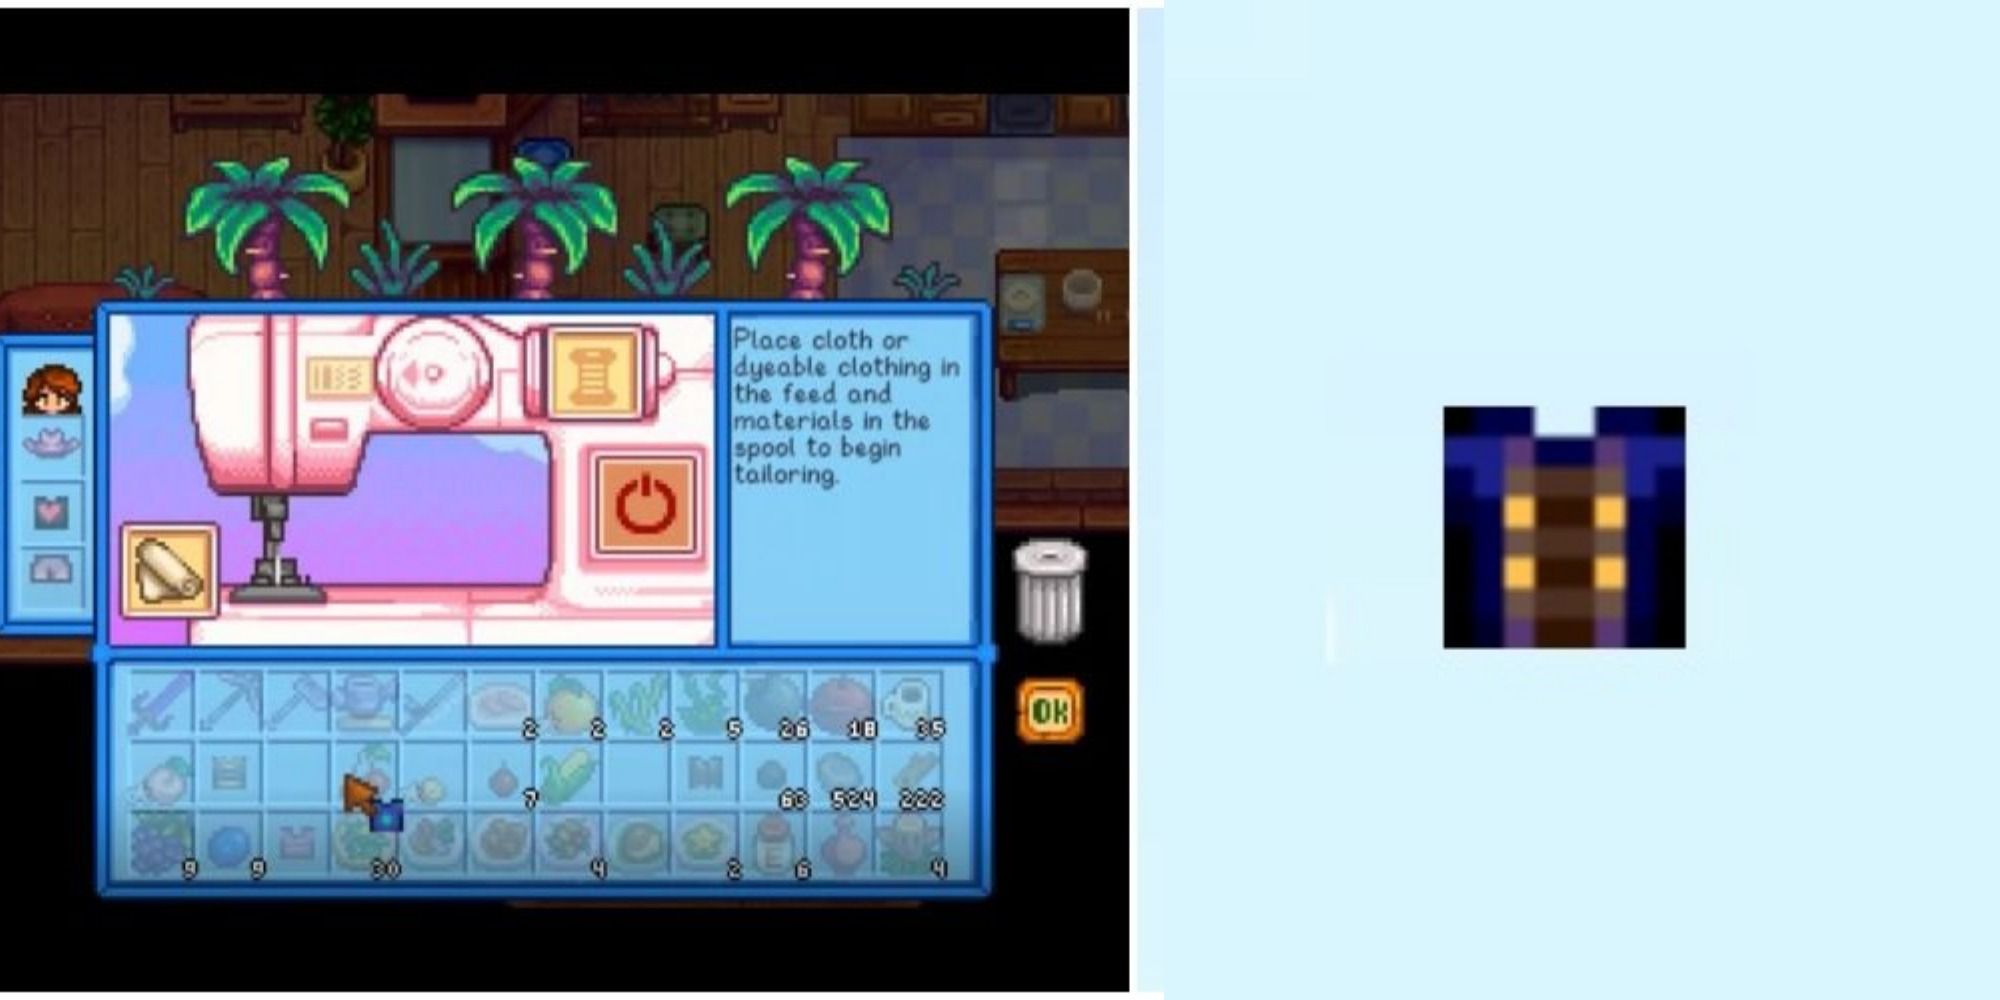 sewing machine using for squid ink stardew valley